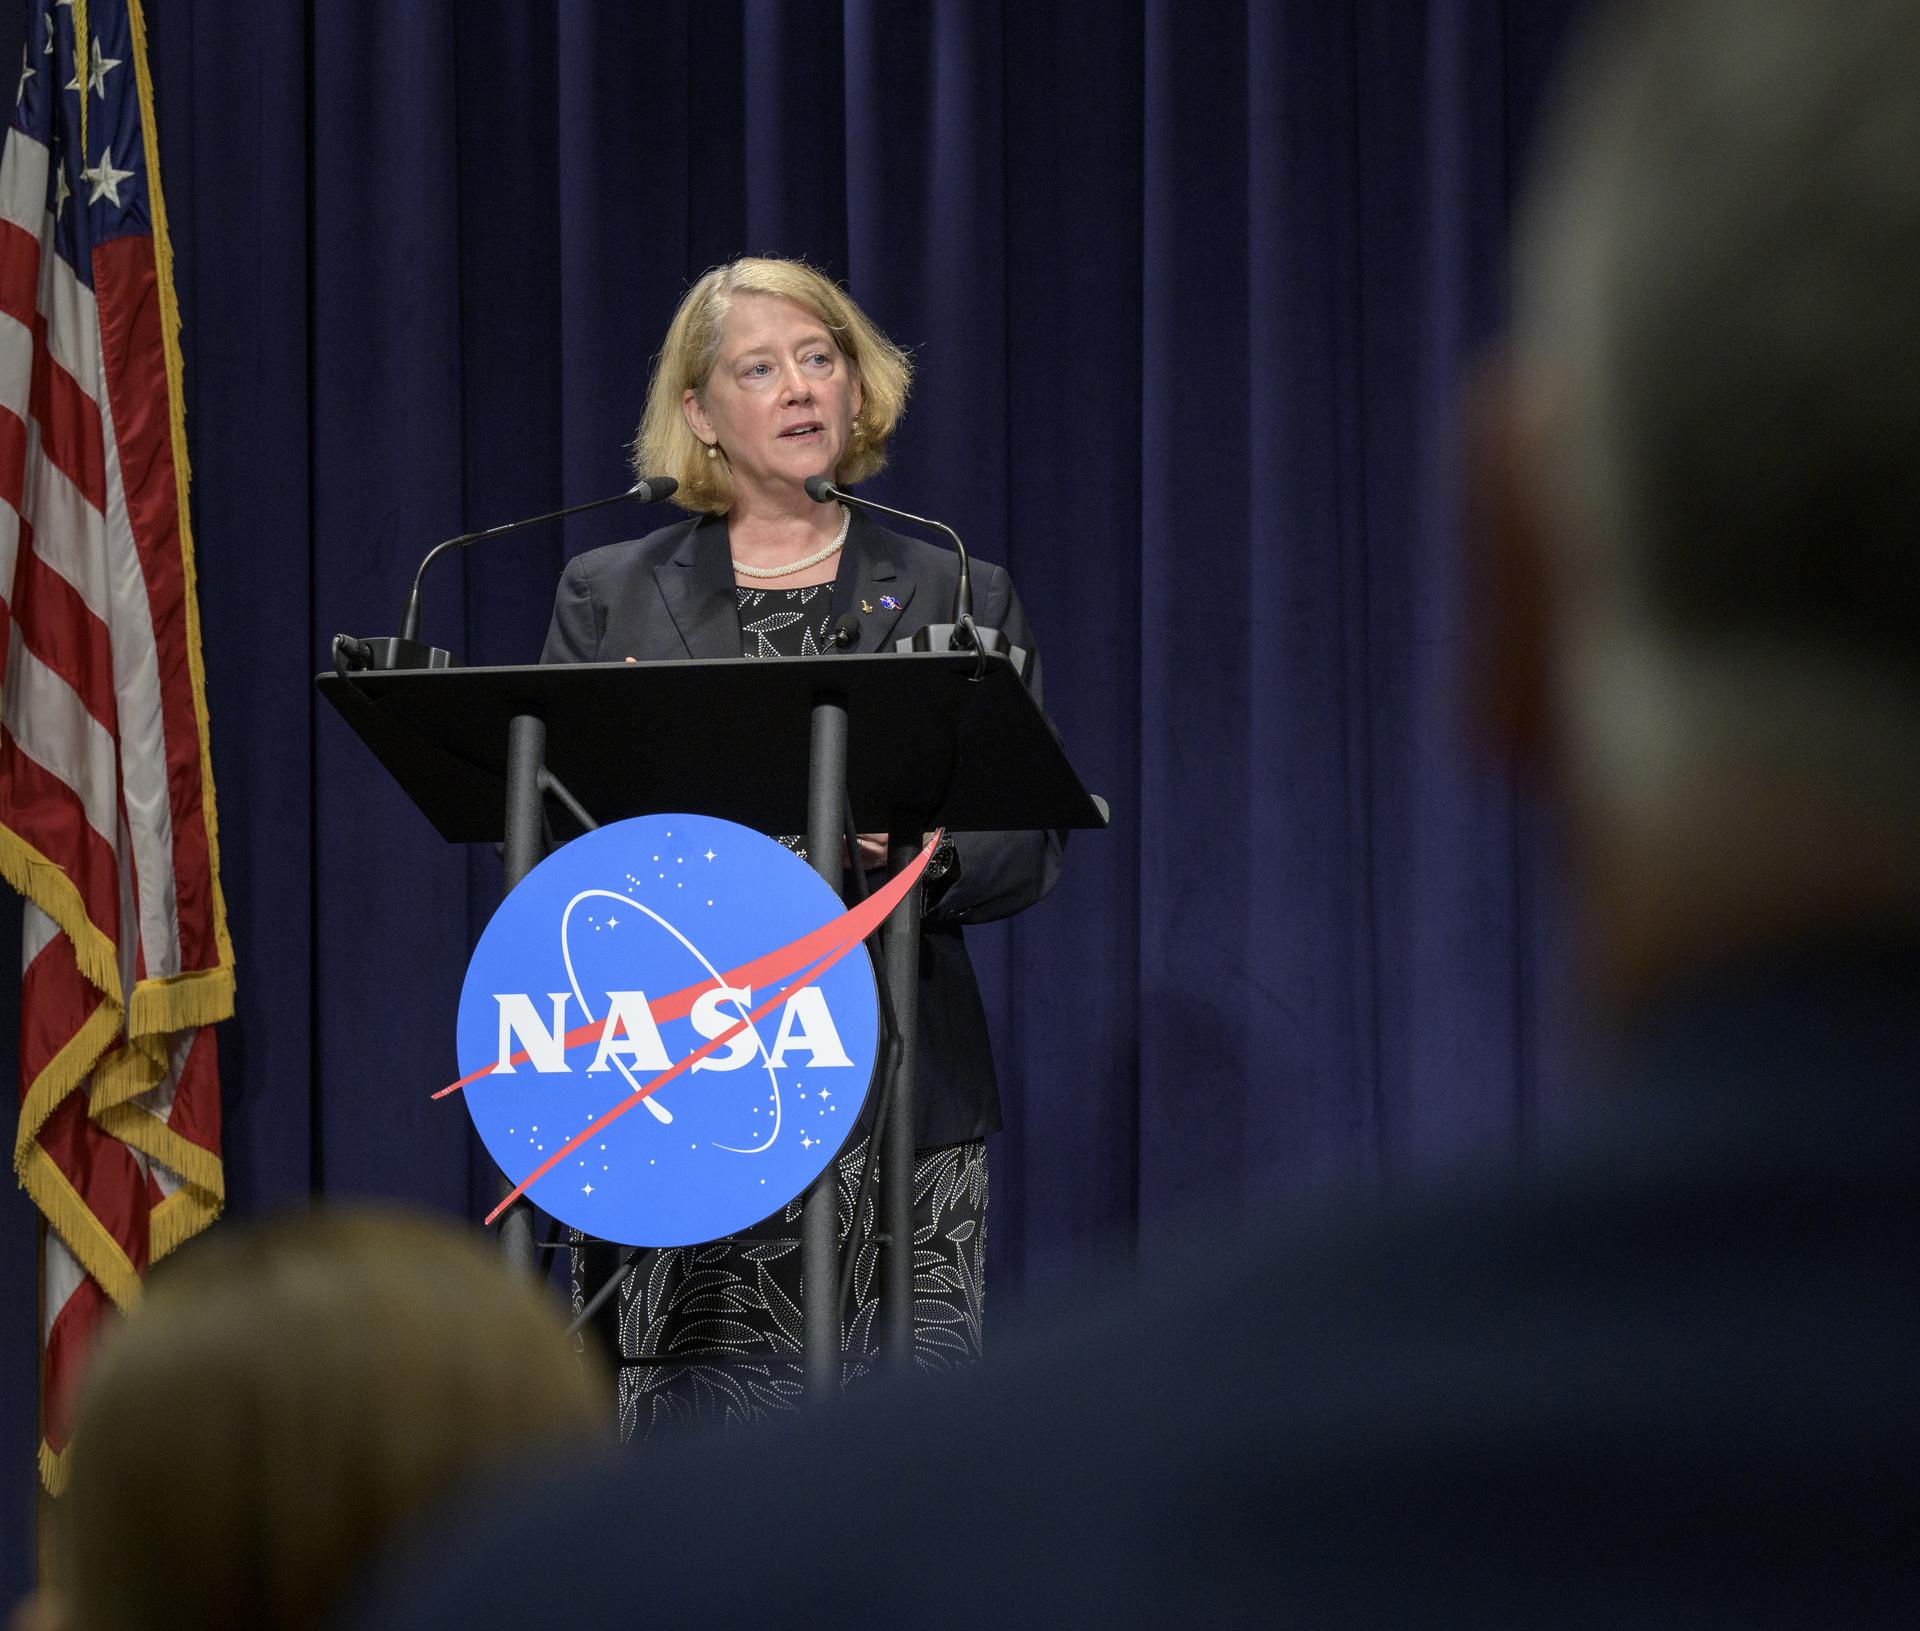 Annual Science Conference to Feature NASA Leadership, Research